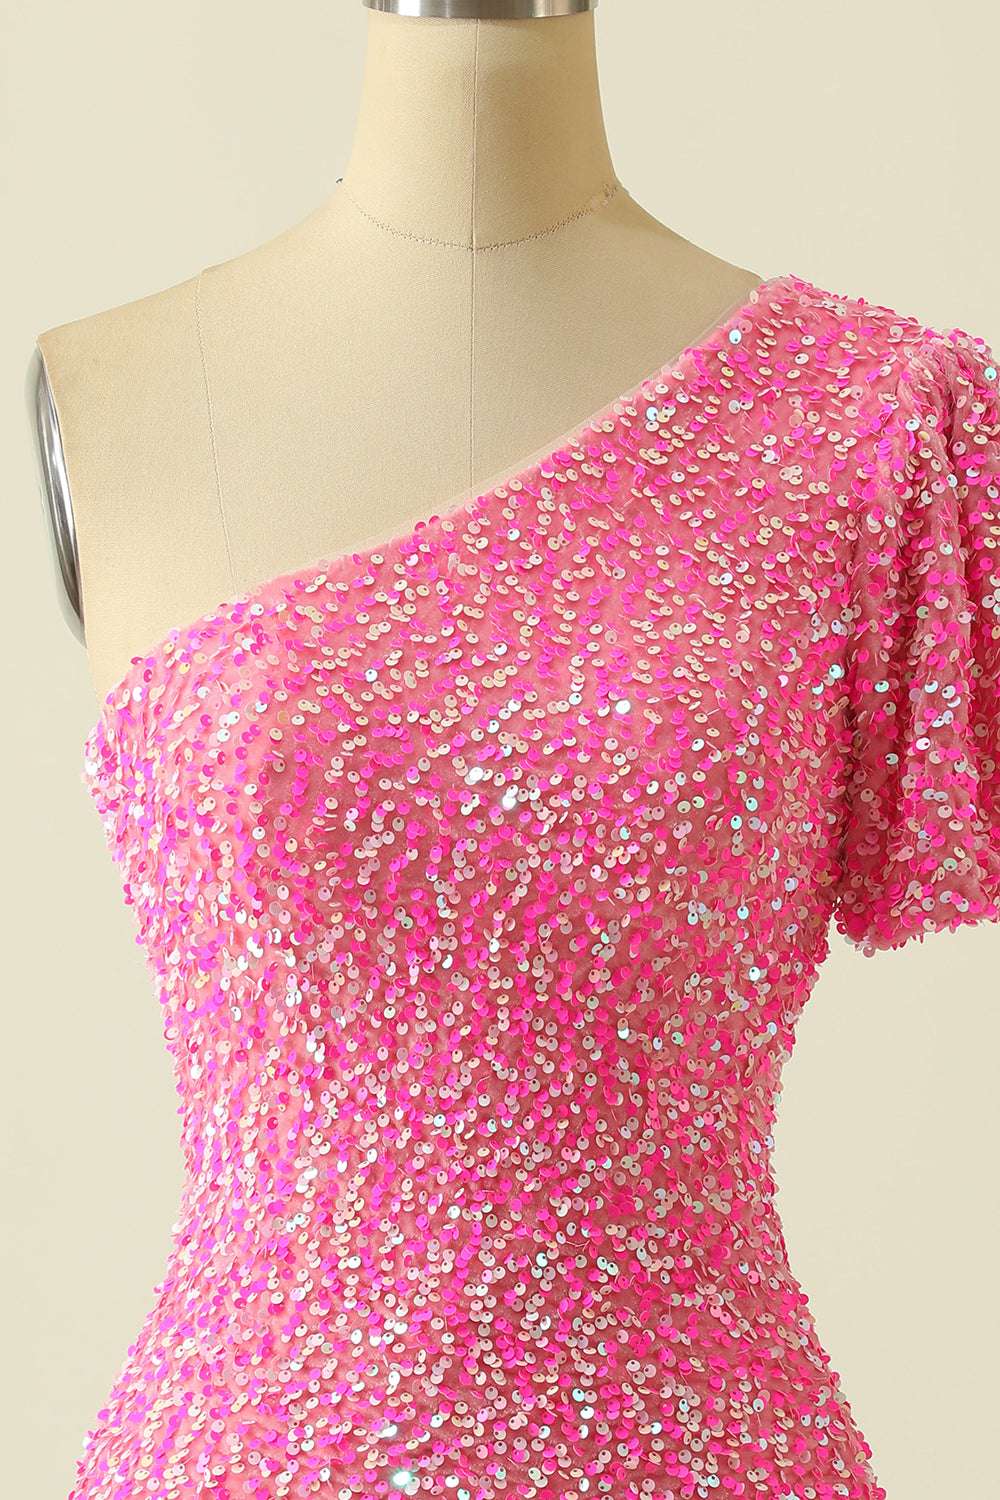 Prom Dress On Sale, Pink Sequin One-Sleeve Bodycon Homecoming Dress